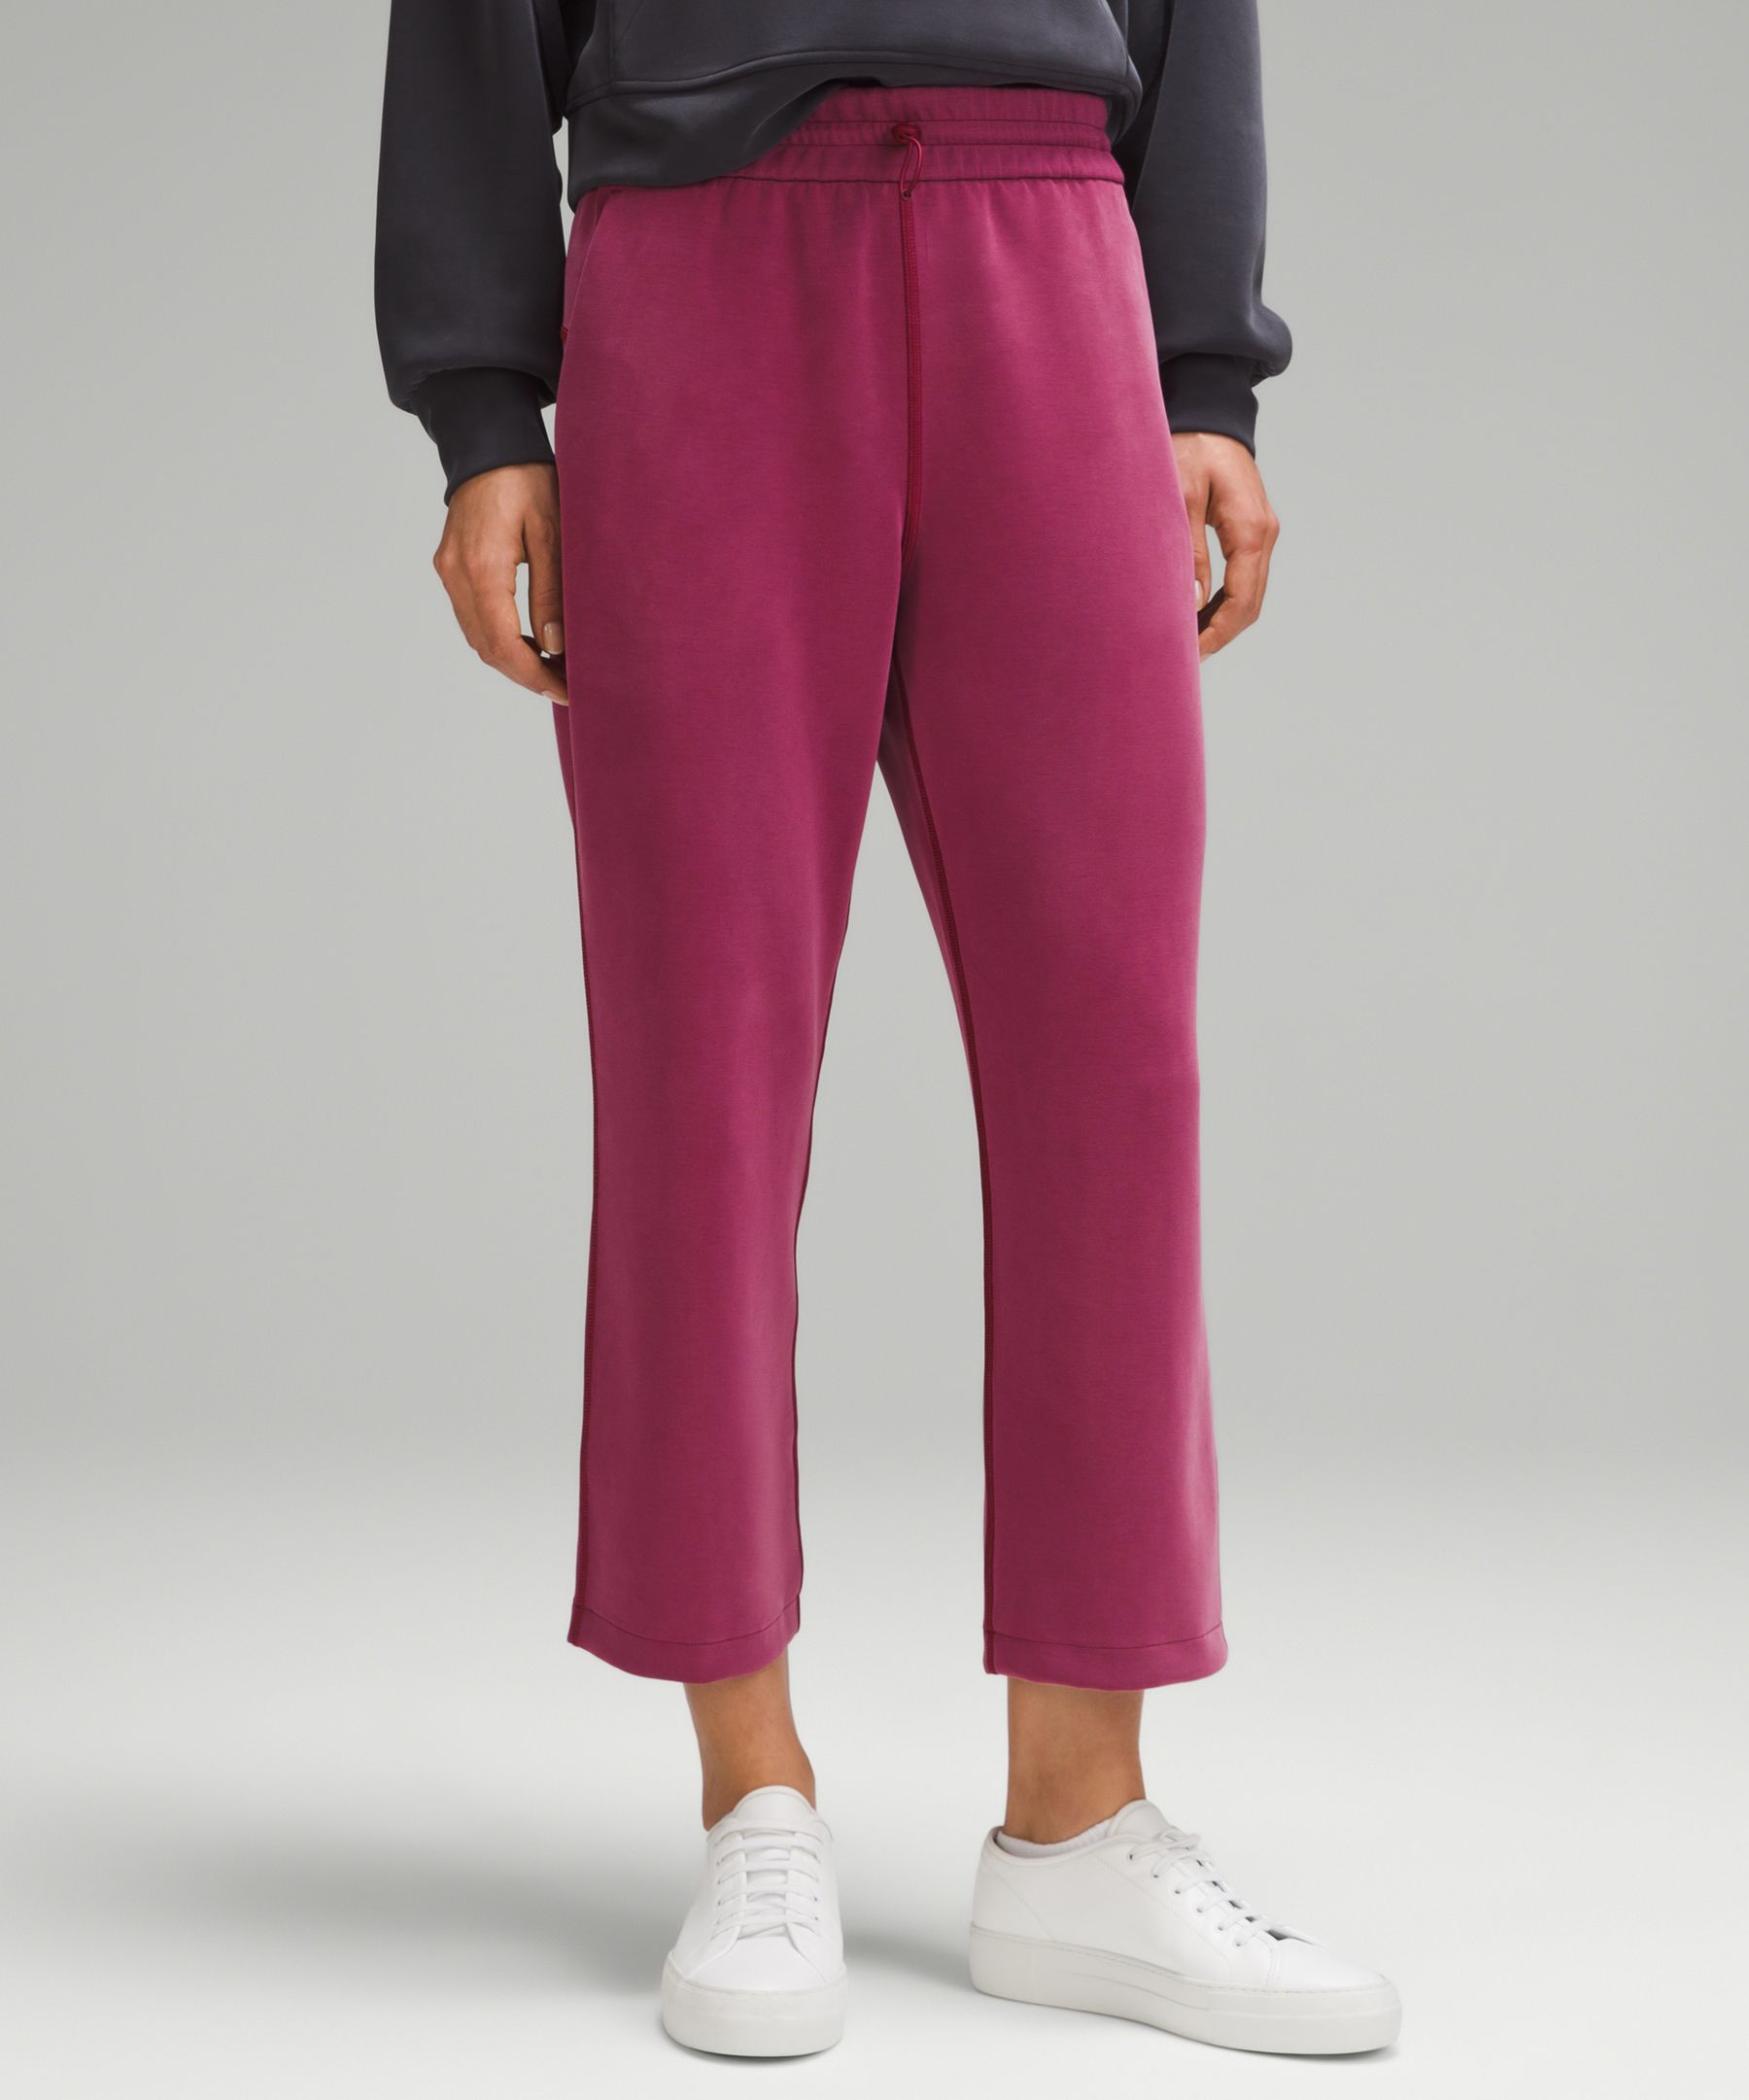 Soft Texture High Rise Align Softstreme Womens Joggers: Weighty Drape Pants  With Straight Leg, Perfect For Sweating And Lounging From  Hellowelcomelulus, $4.35